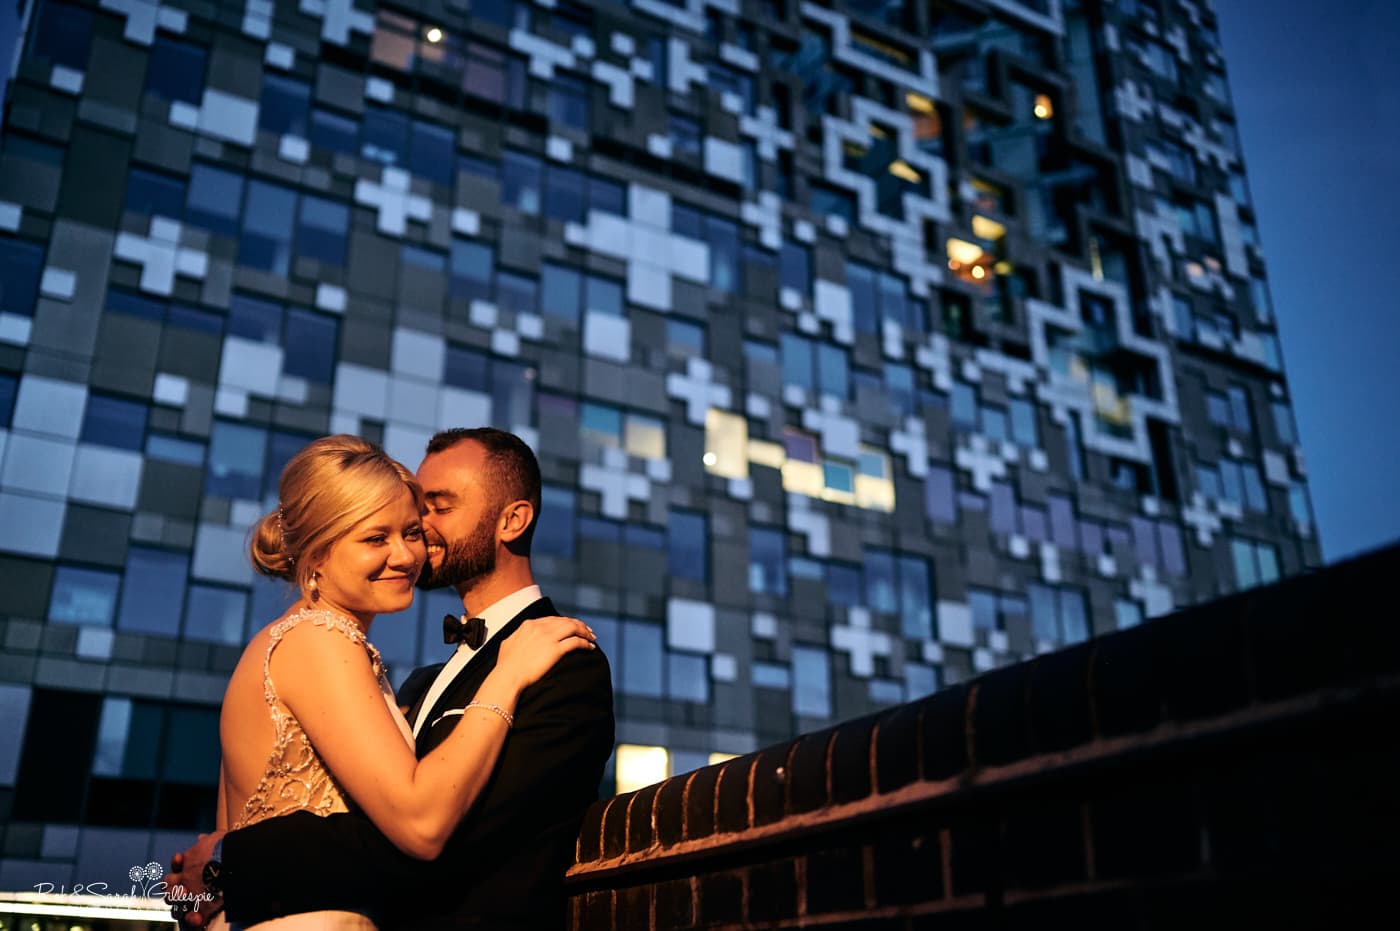 Bride and groom outside The Cube in Birmingham at night